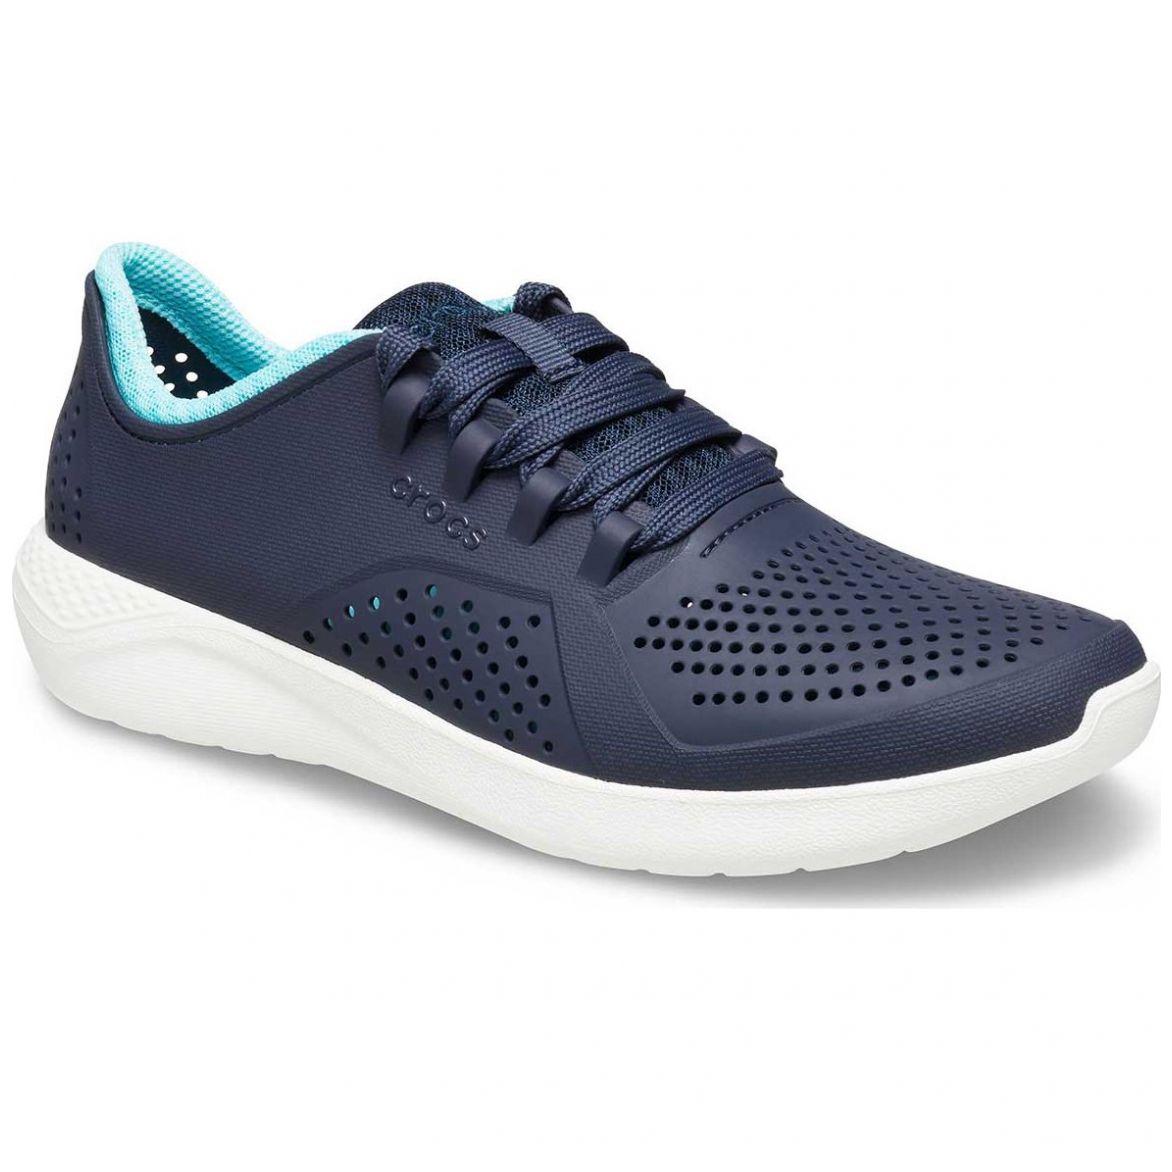 Mujer joven resistencia Remontarse Tenis Literide Pacer Mujer Azul Obscuro Crocs